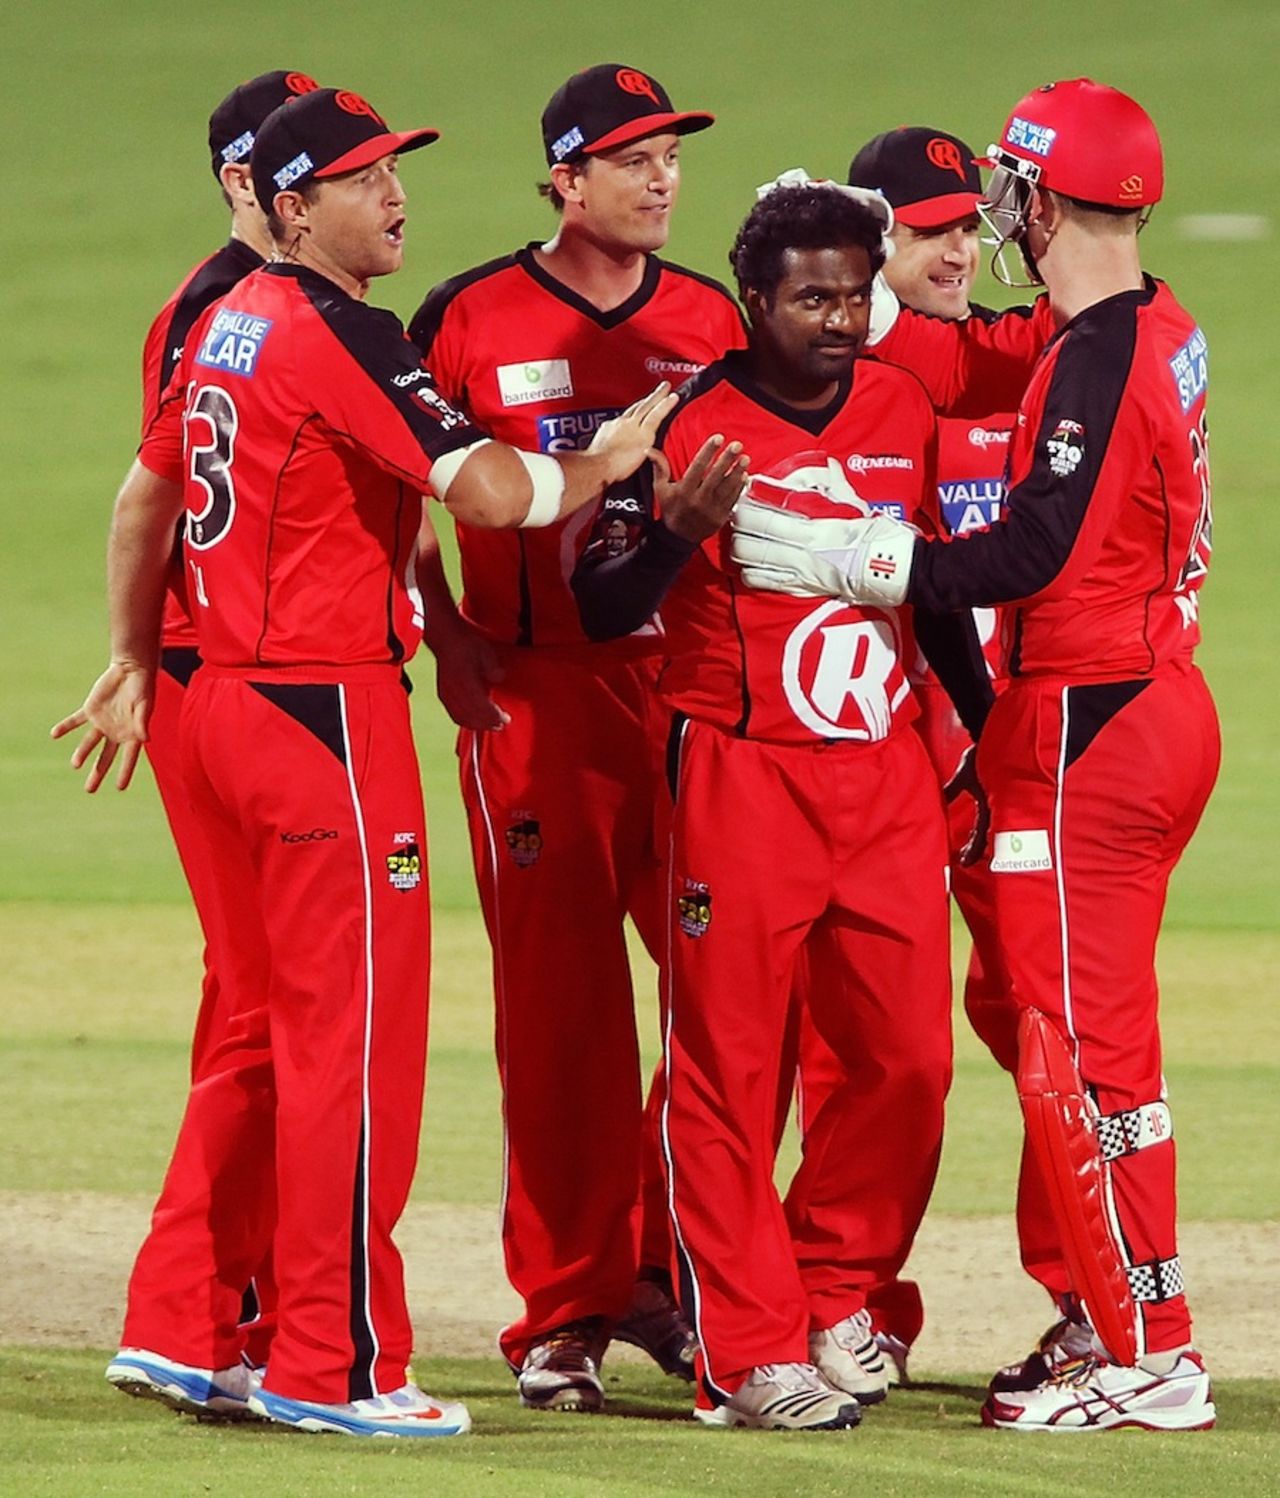 Muttiah Muralitharan struck twice for only 16 runs, Adelaide Strikers v Melbourne Renegades, Big Bash League, Adelaide, January 22, 2014